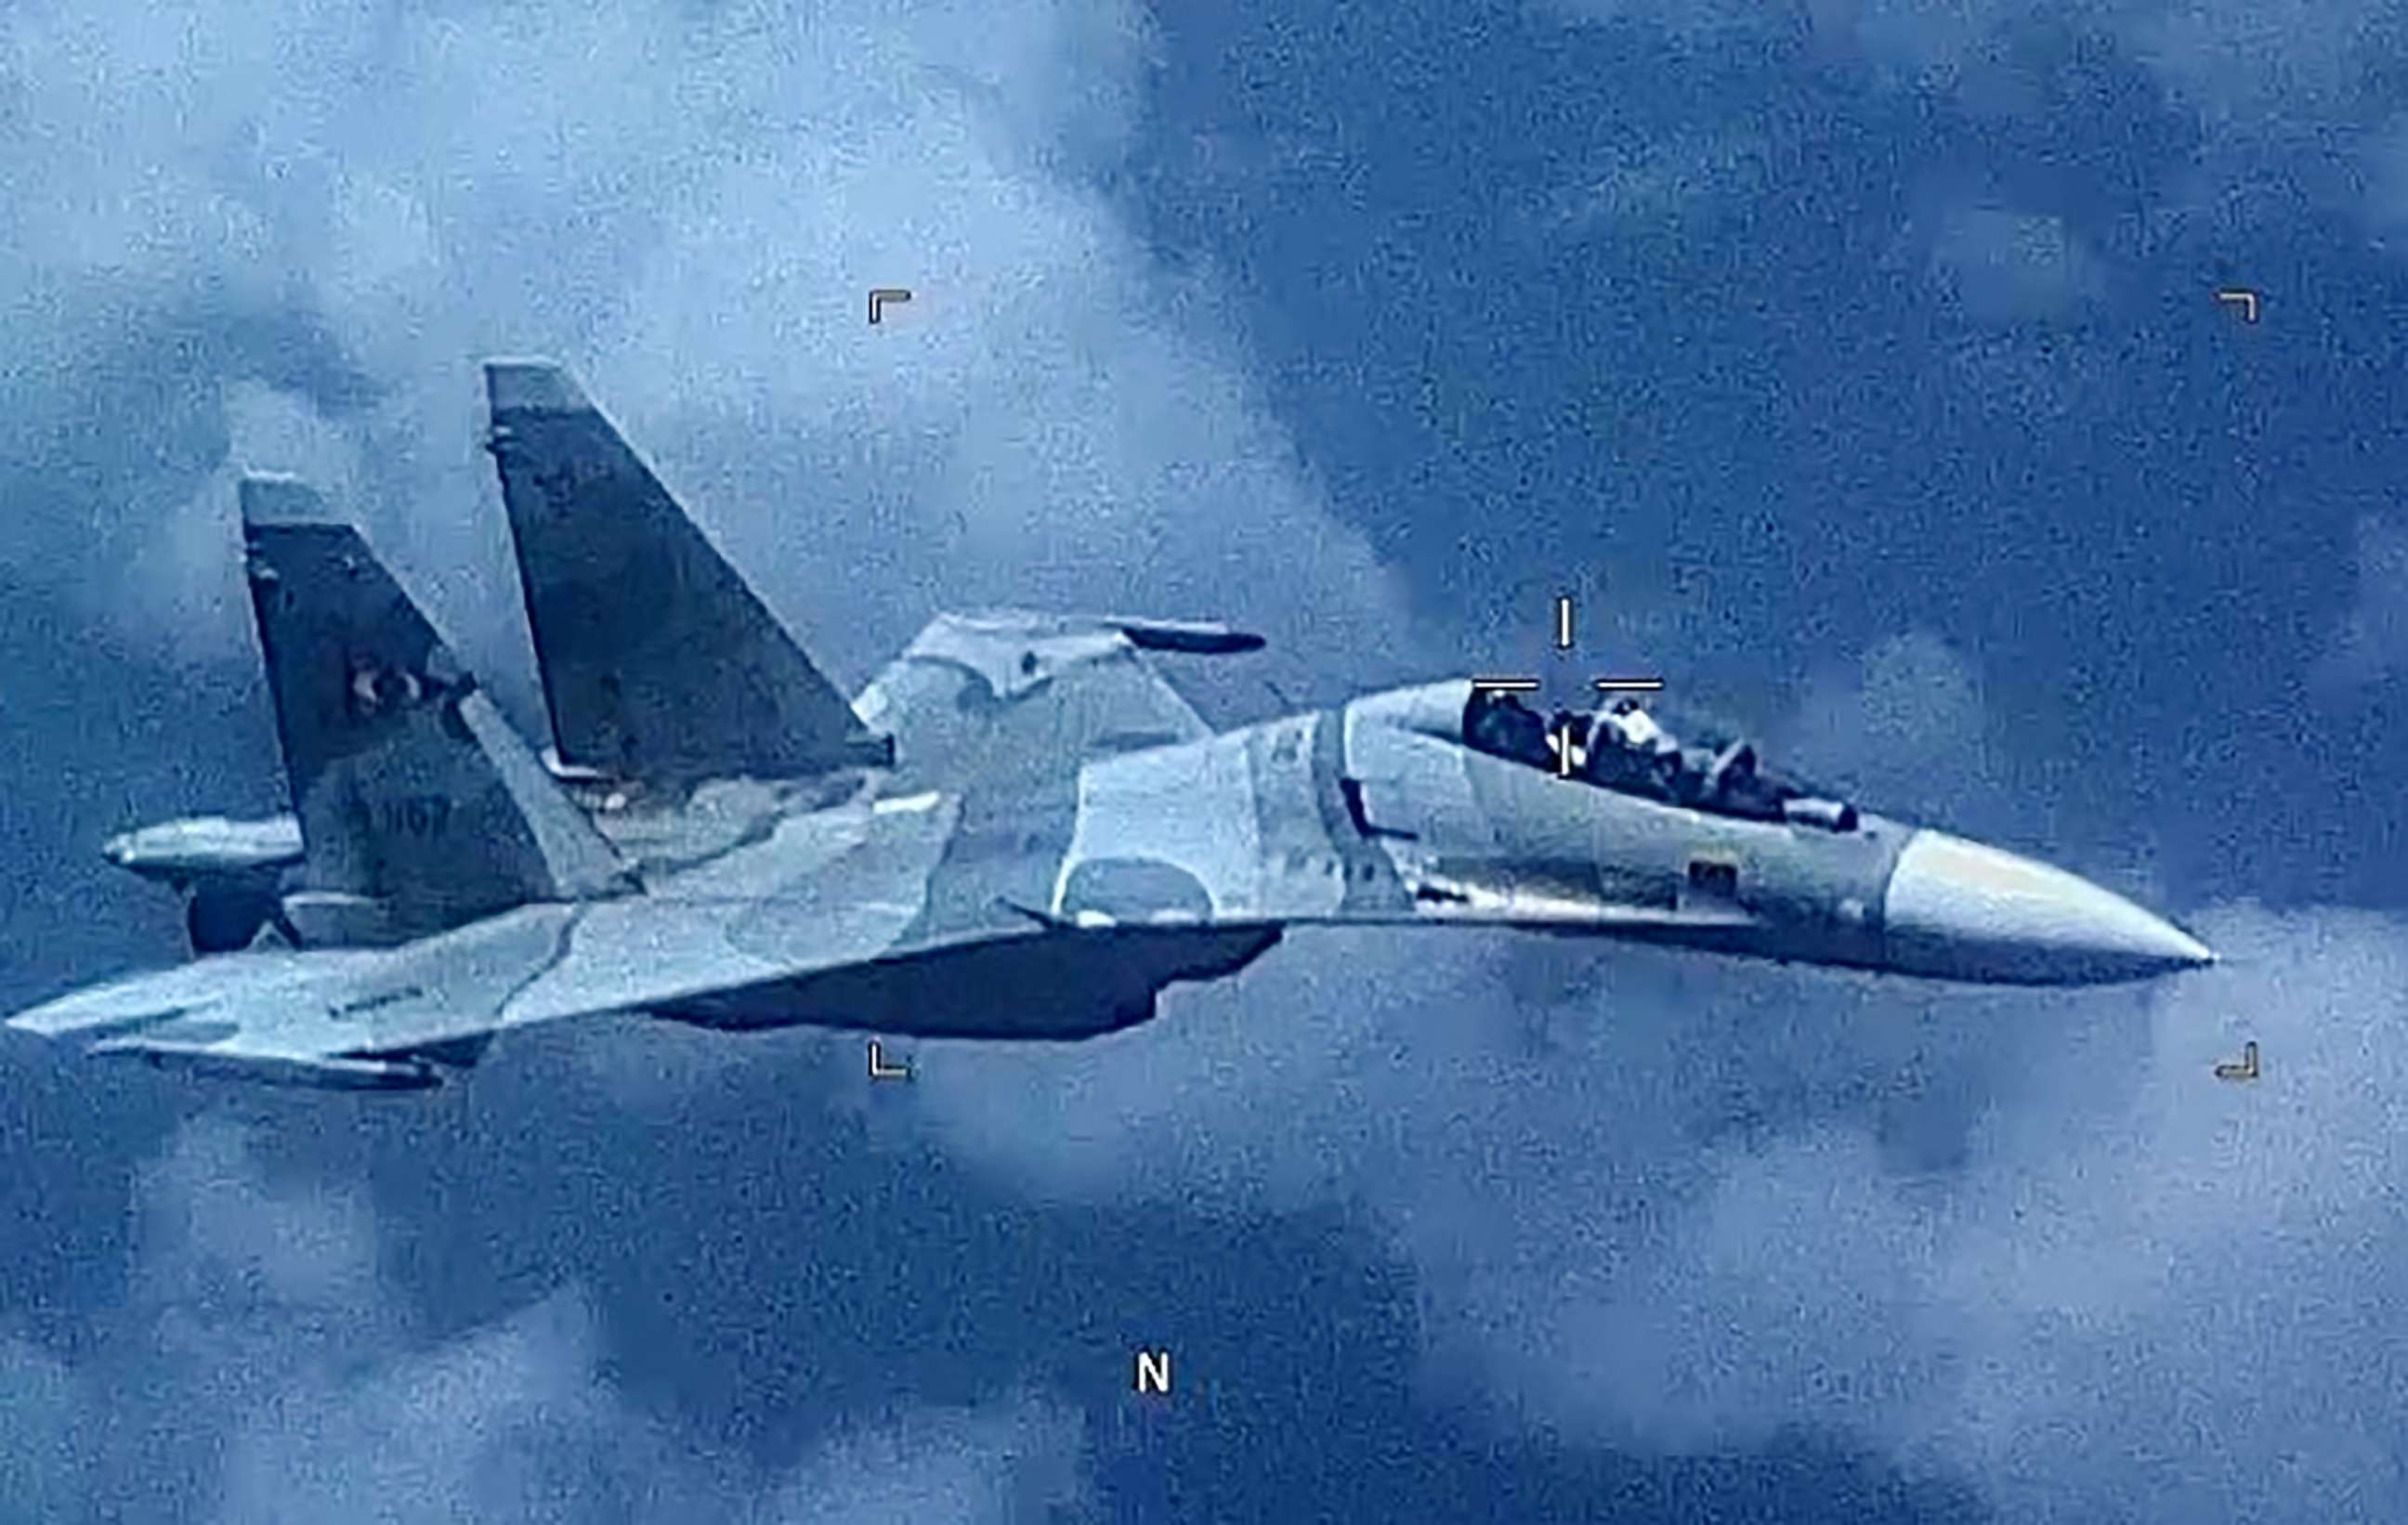 PHOTO: Image of a Venezuela SU-30 Flanker as it aggressively shadowed a U.S. EP-3 Aries II at an unsafe distance in international airspace over the Caribbean Sea on July 19, 2019, jeopardizing the crew and aircraft.